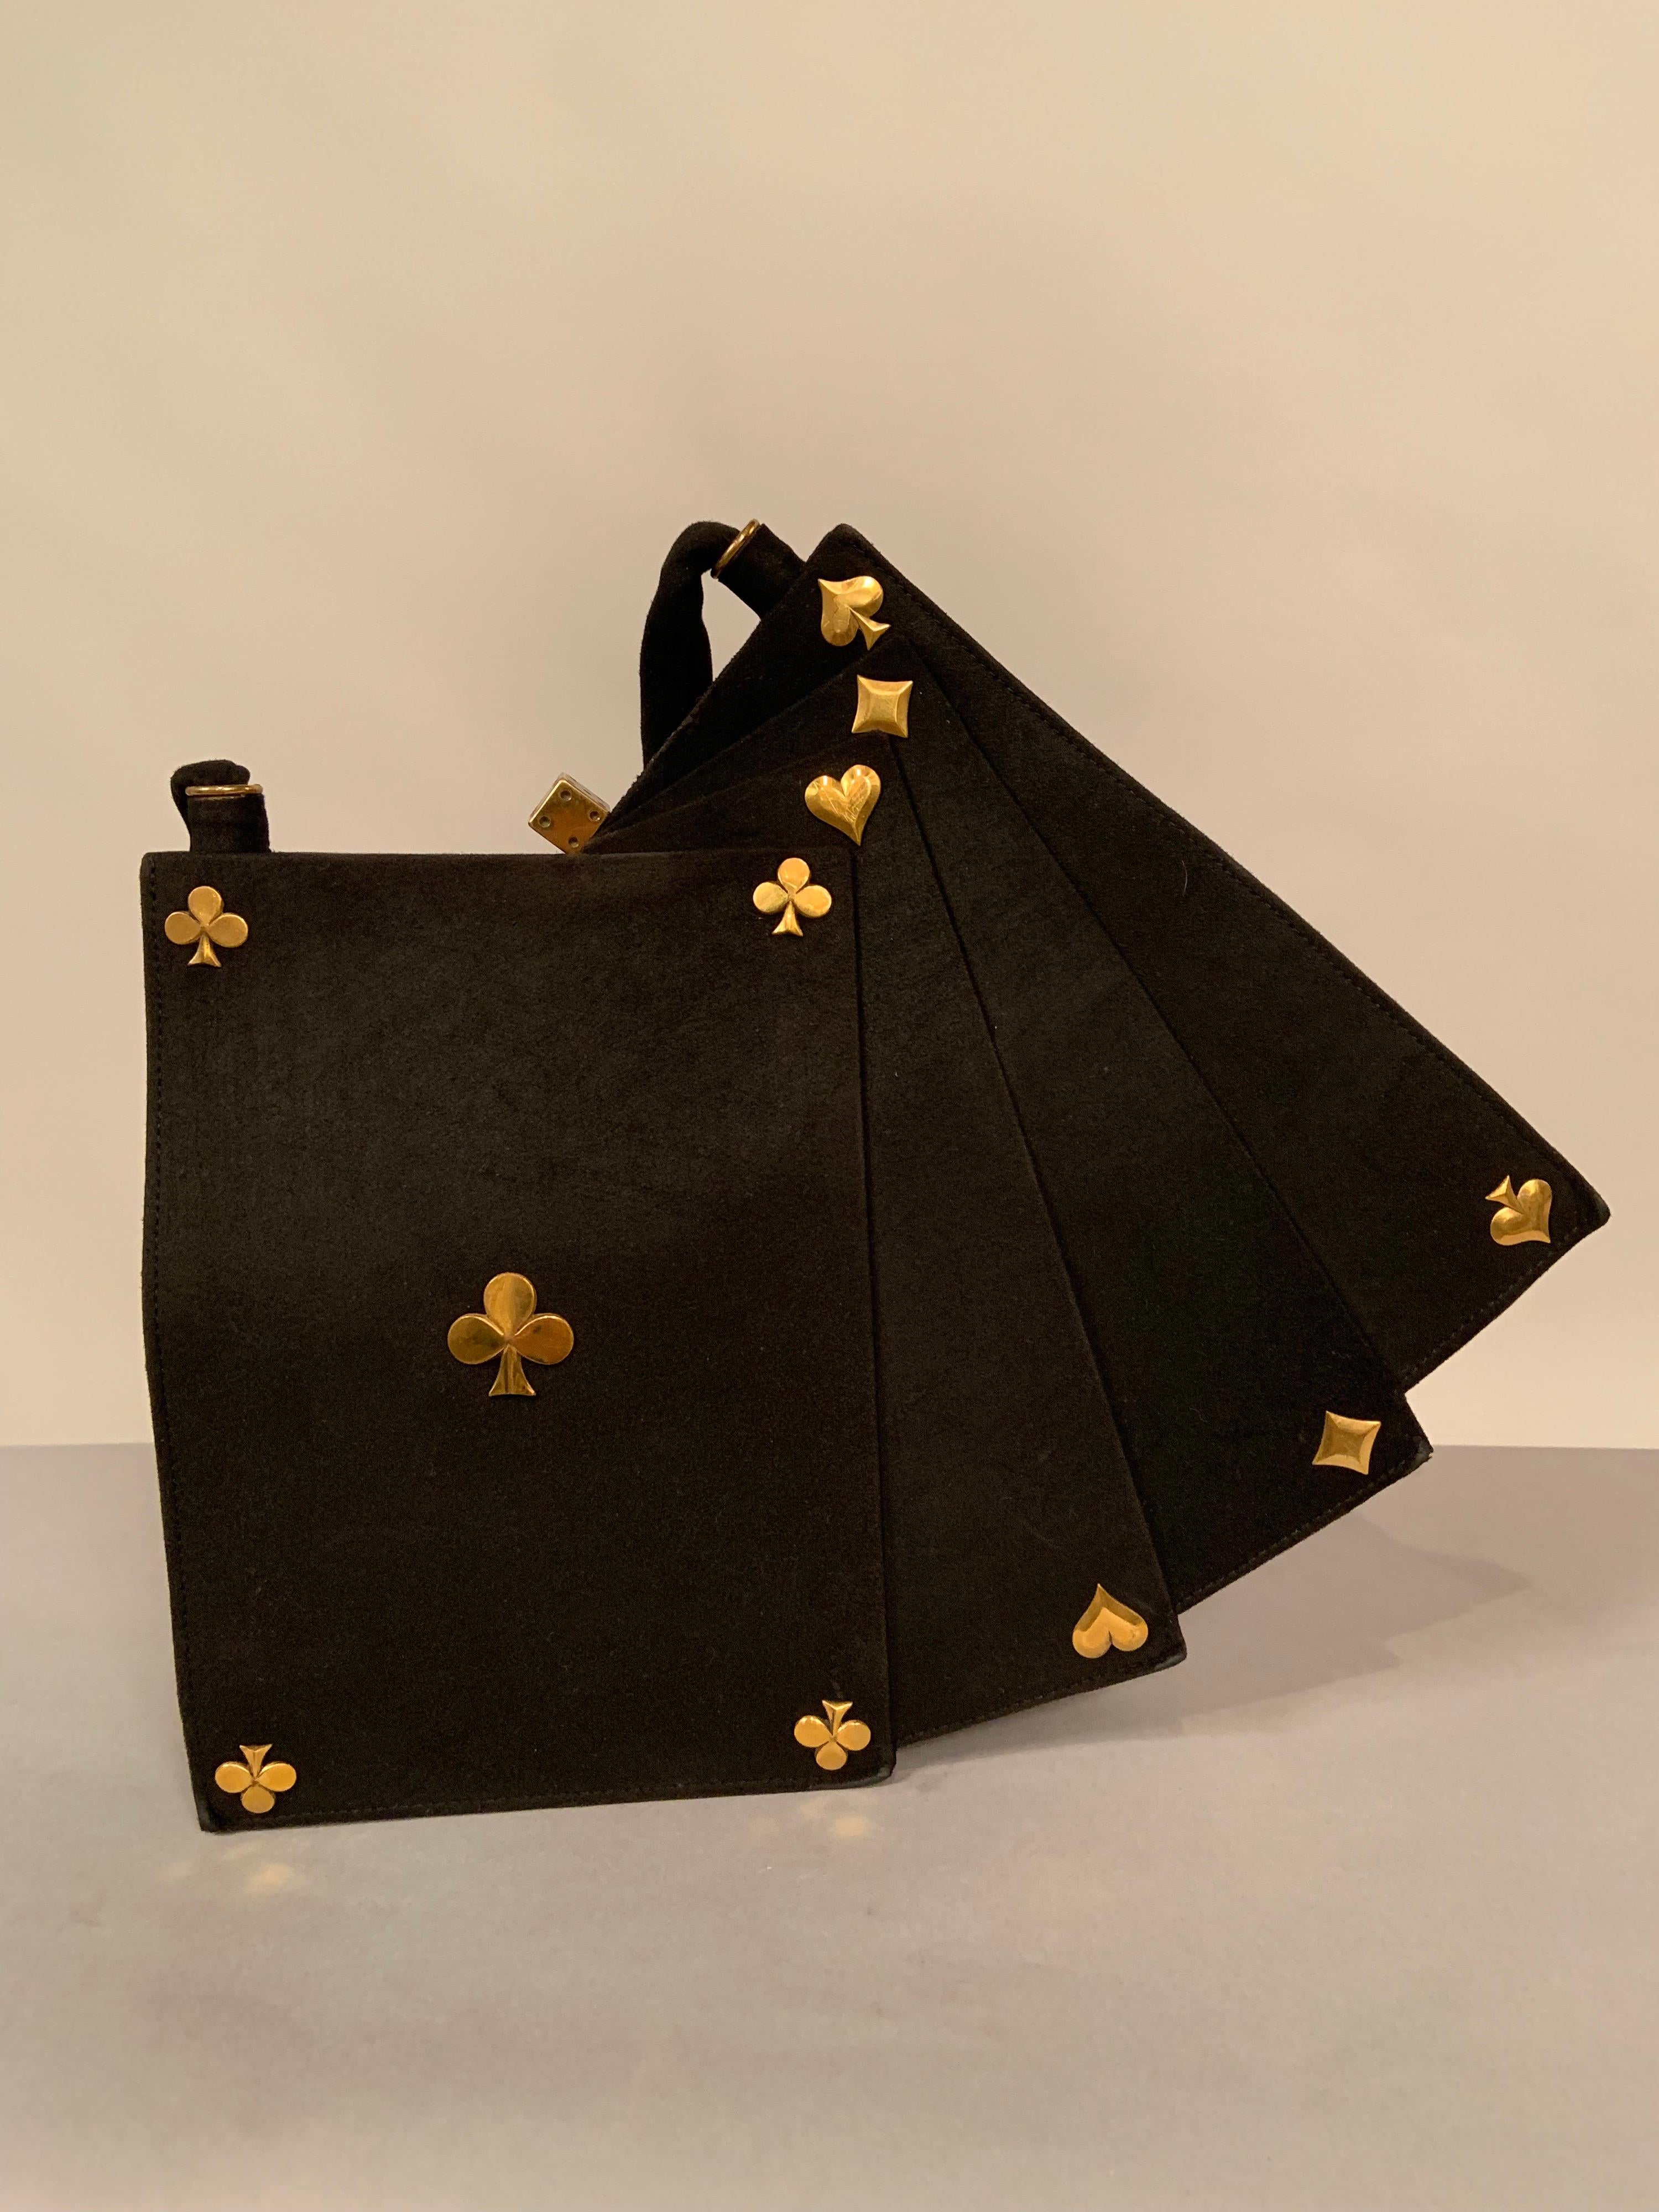 This charming and witty bag was most likely designed by Anne Marie, Paris a designer specialising in bags shaped like playing cards, fans, ice buckets and champagne bottles. It is not labelled though. The bag is black suede with gold toned